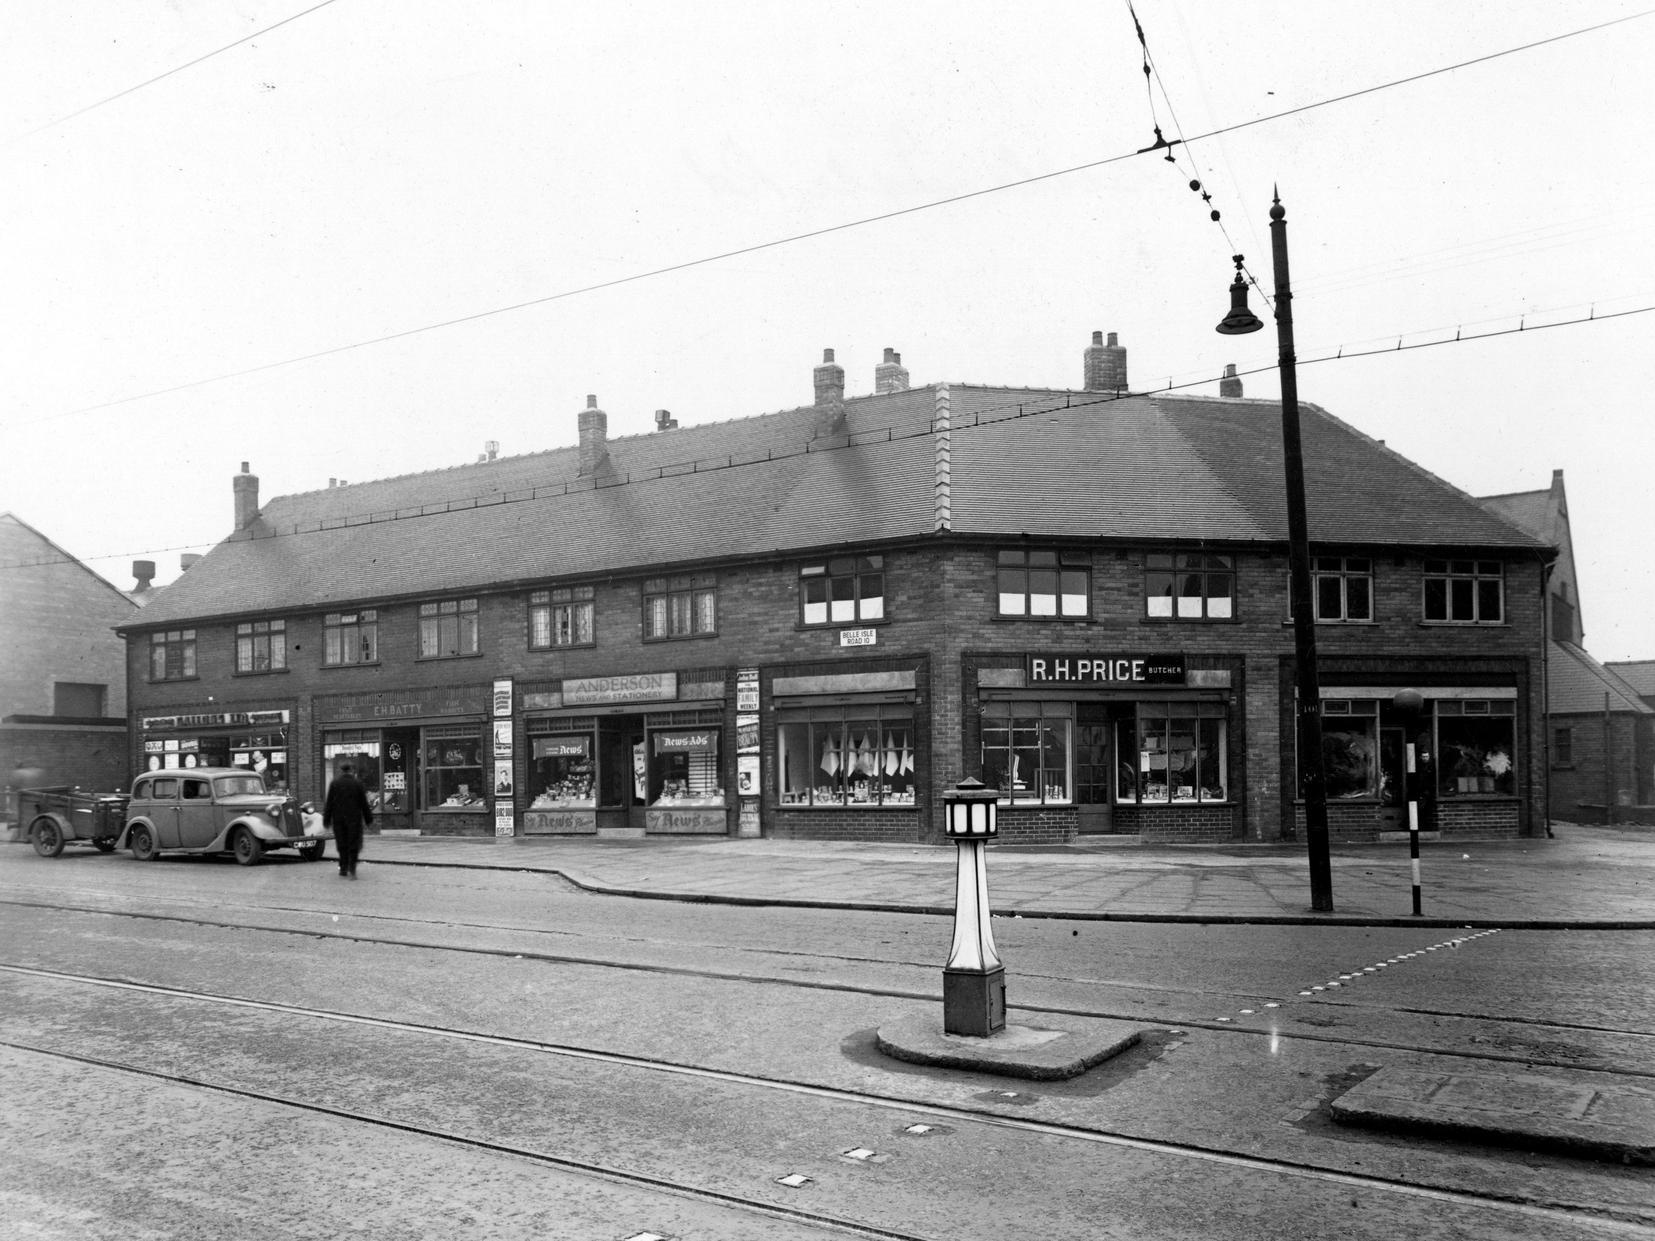 A block of shops at the corner of Belle Isle Road and Moor Road containing Gallons Ltd., a greengrocers, Andersons Newsagent and Stationers, R. H. Price Butchers and E. H. Batty's fruit and vegetables.